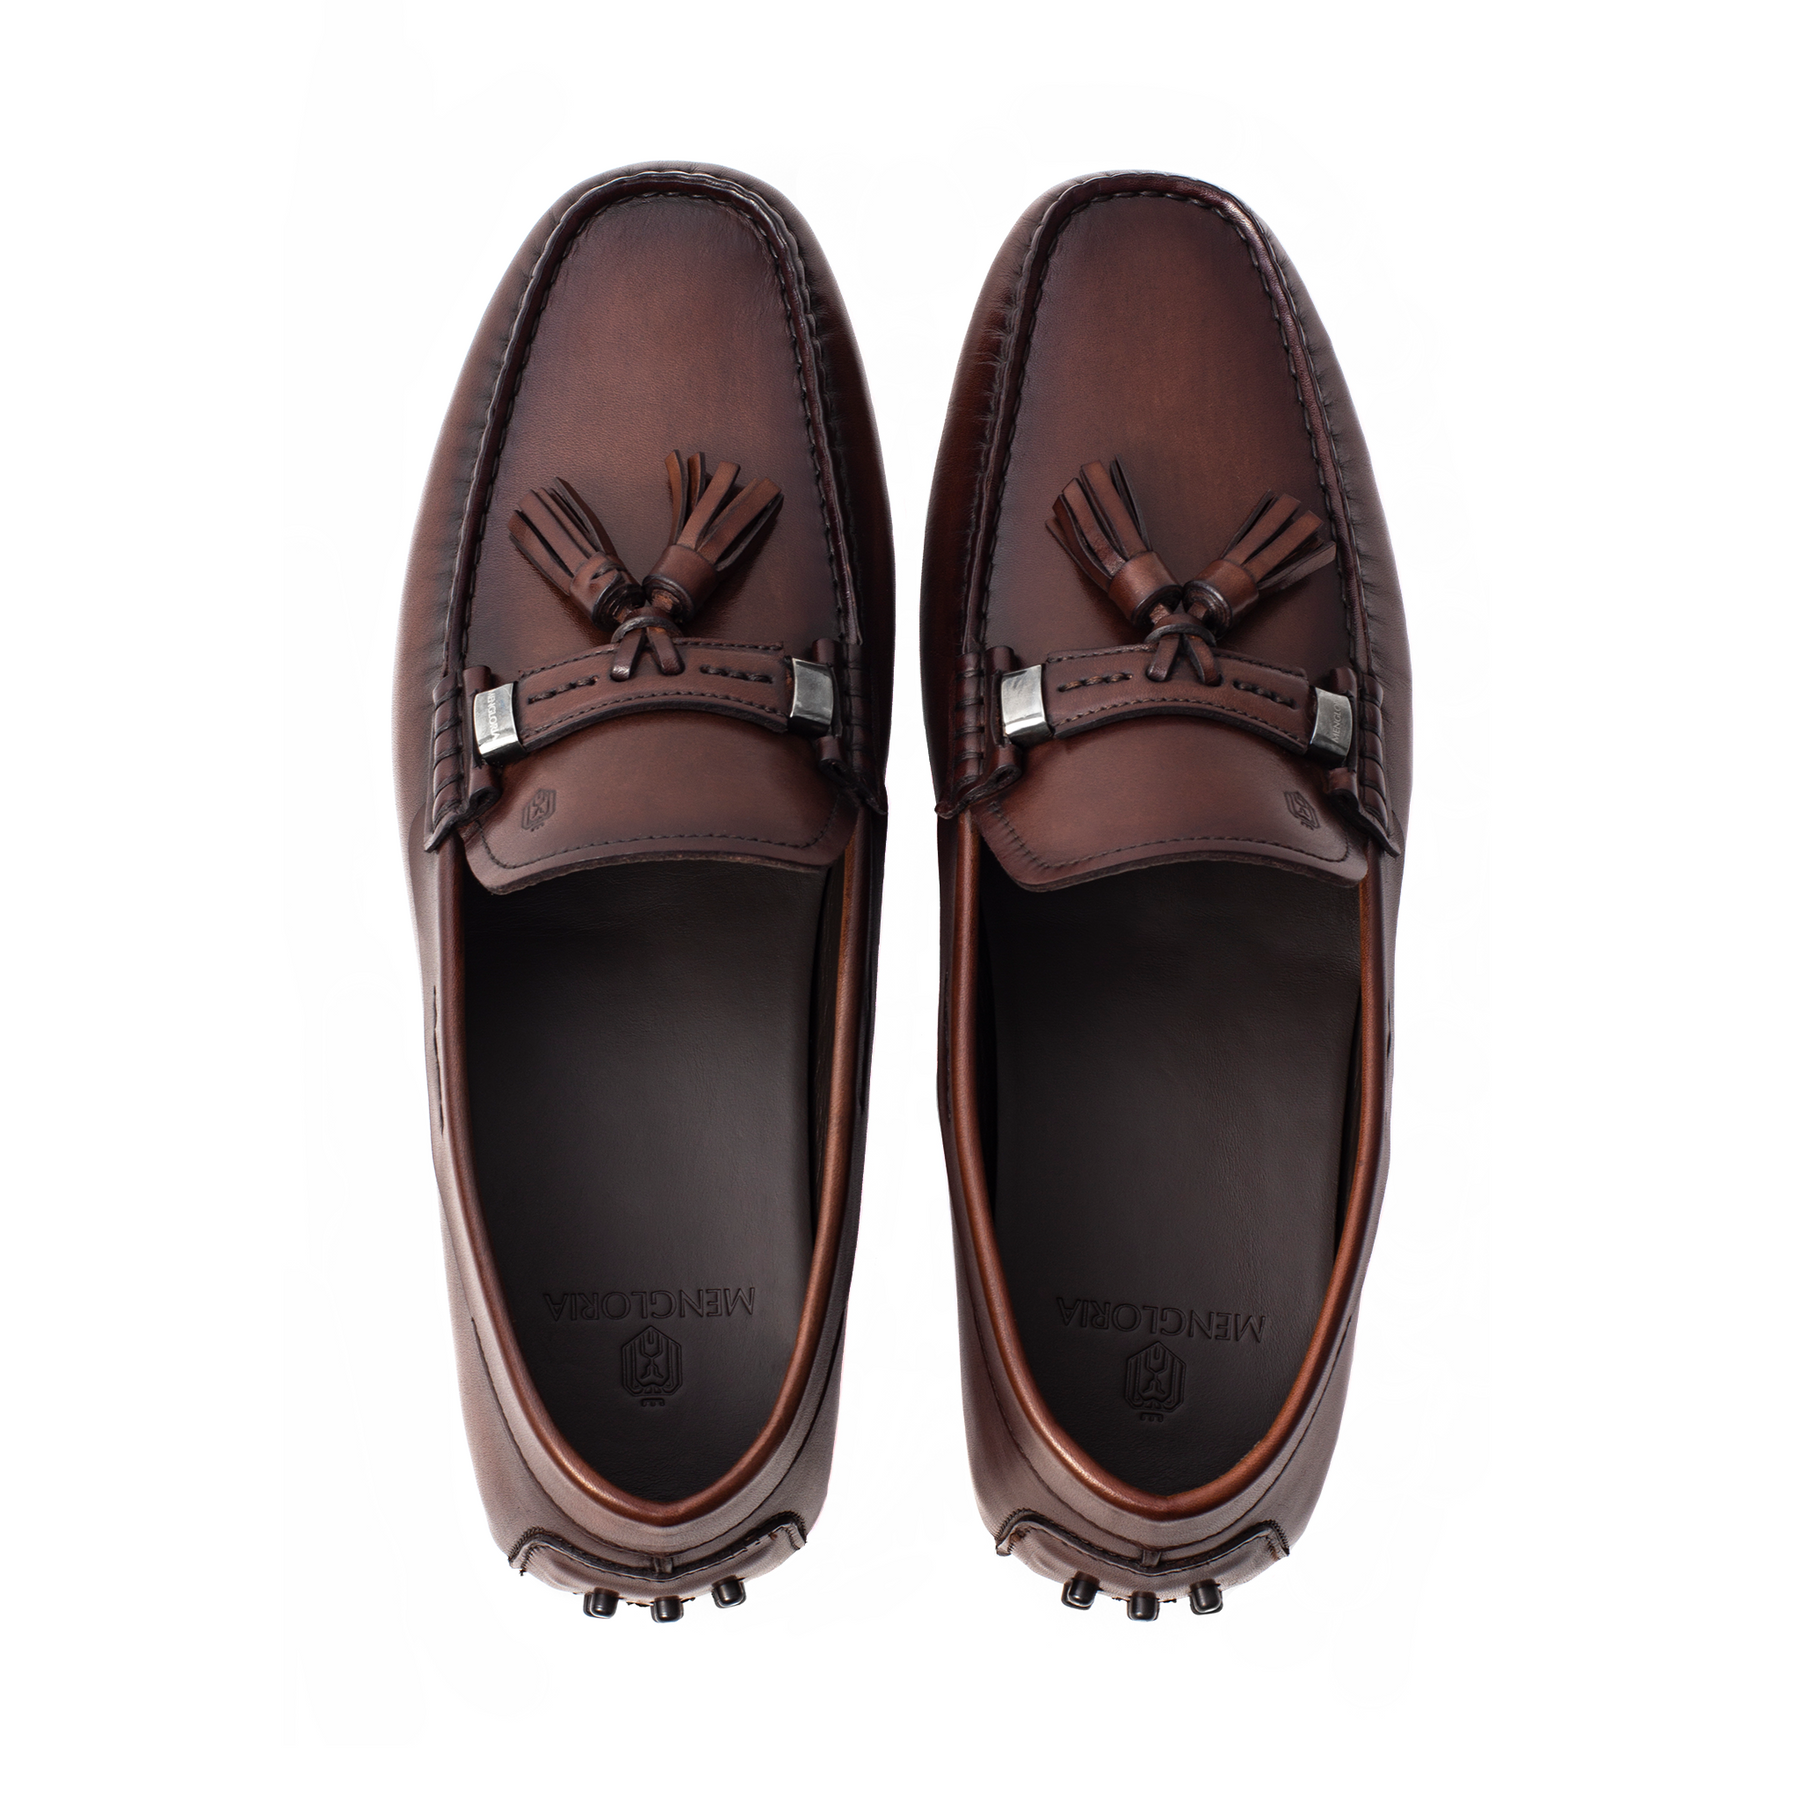 Men Brown Leather With Tassels Moccasin Loafer 